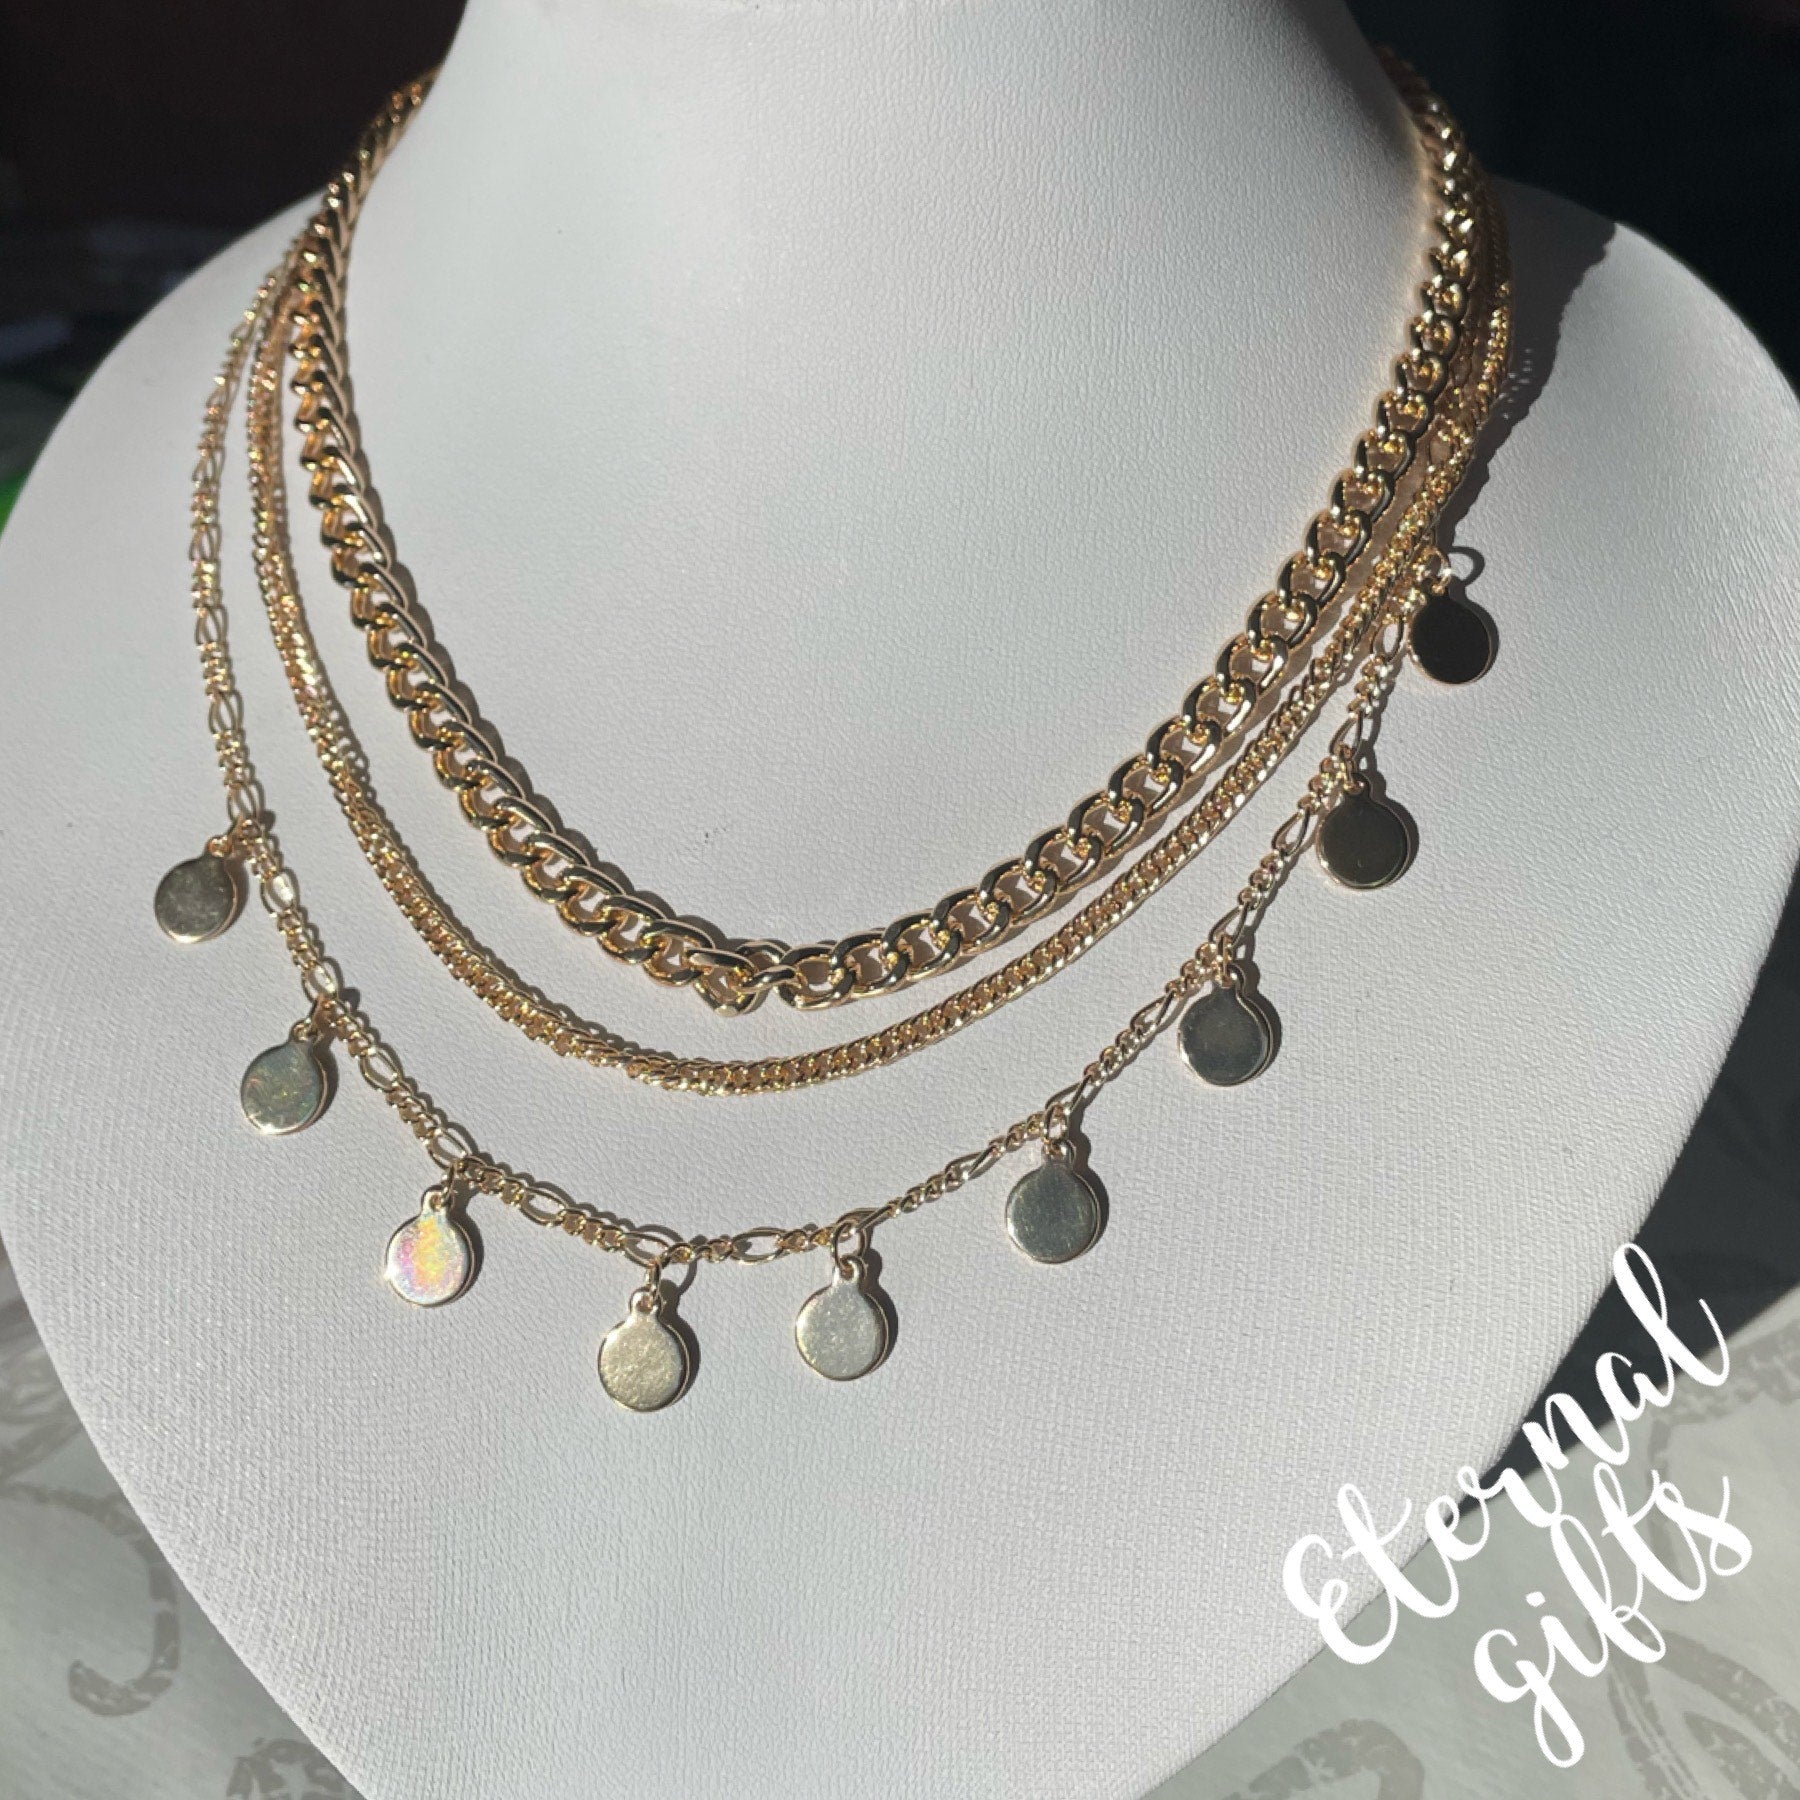 The Anya in Gold 3 Layered Neckpiece By Estela